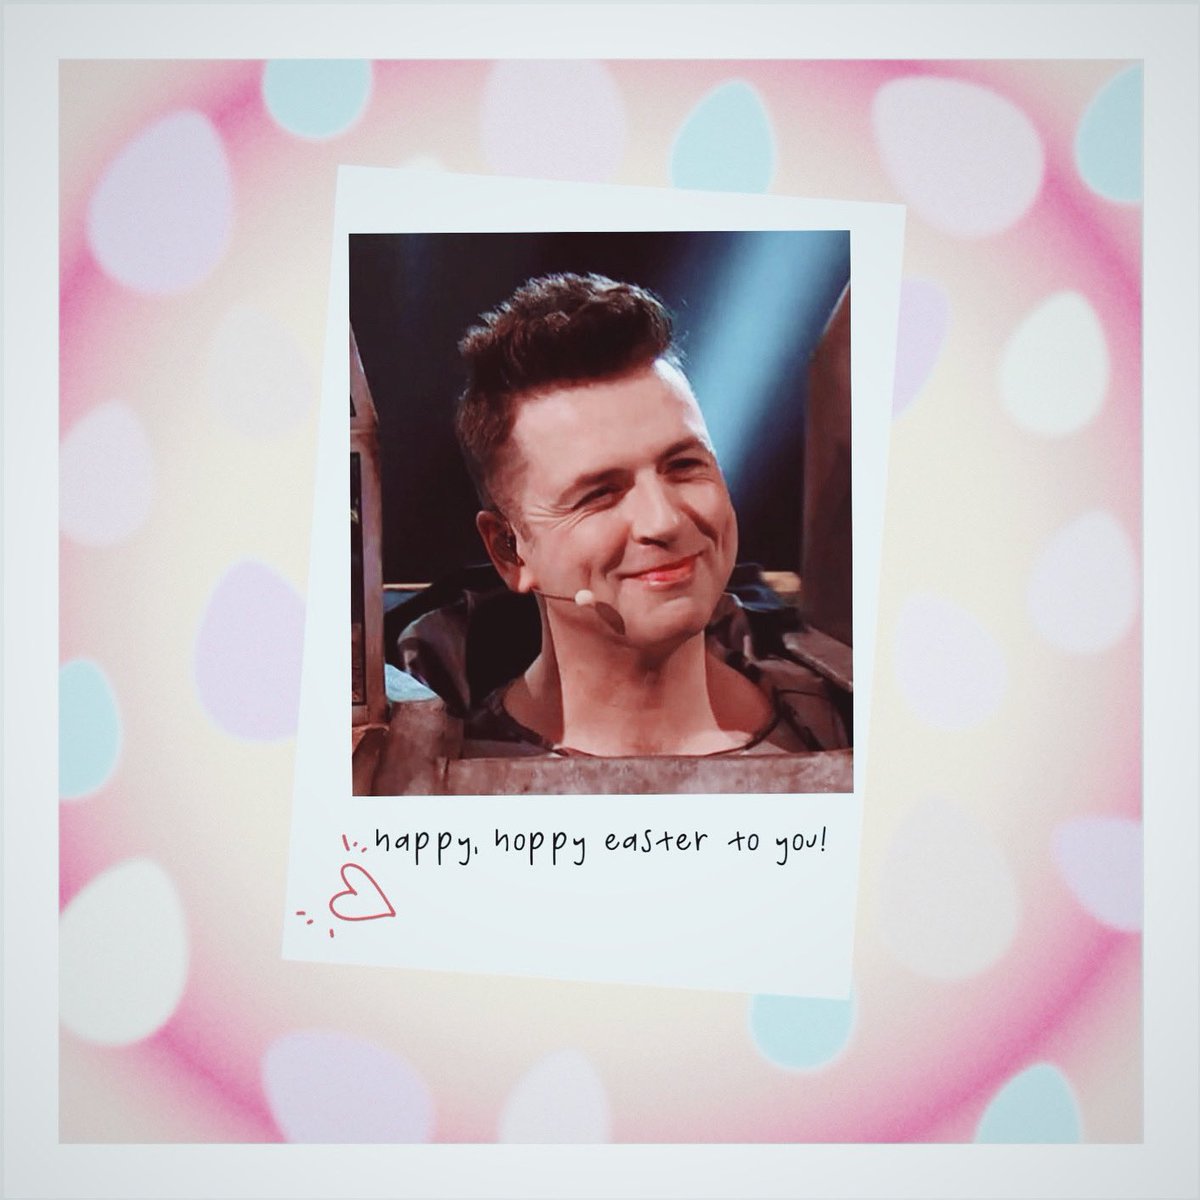 Happy Easter to our fave bunny in the world aka #Robobunny 🤖 🐰 aka @MarkusFeehily! ♥️🙃🐣 We love you so much and hope you’re feeling better and enjoying this day with your family Marky! 😊 Happy Easter to everyone celebrating today! ❤️